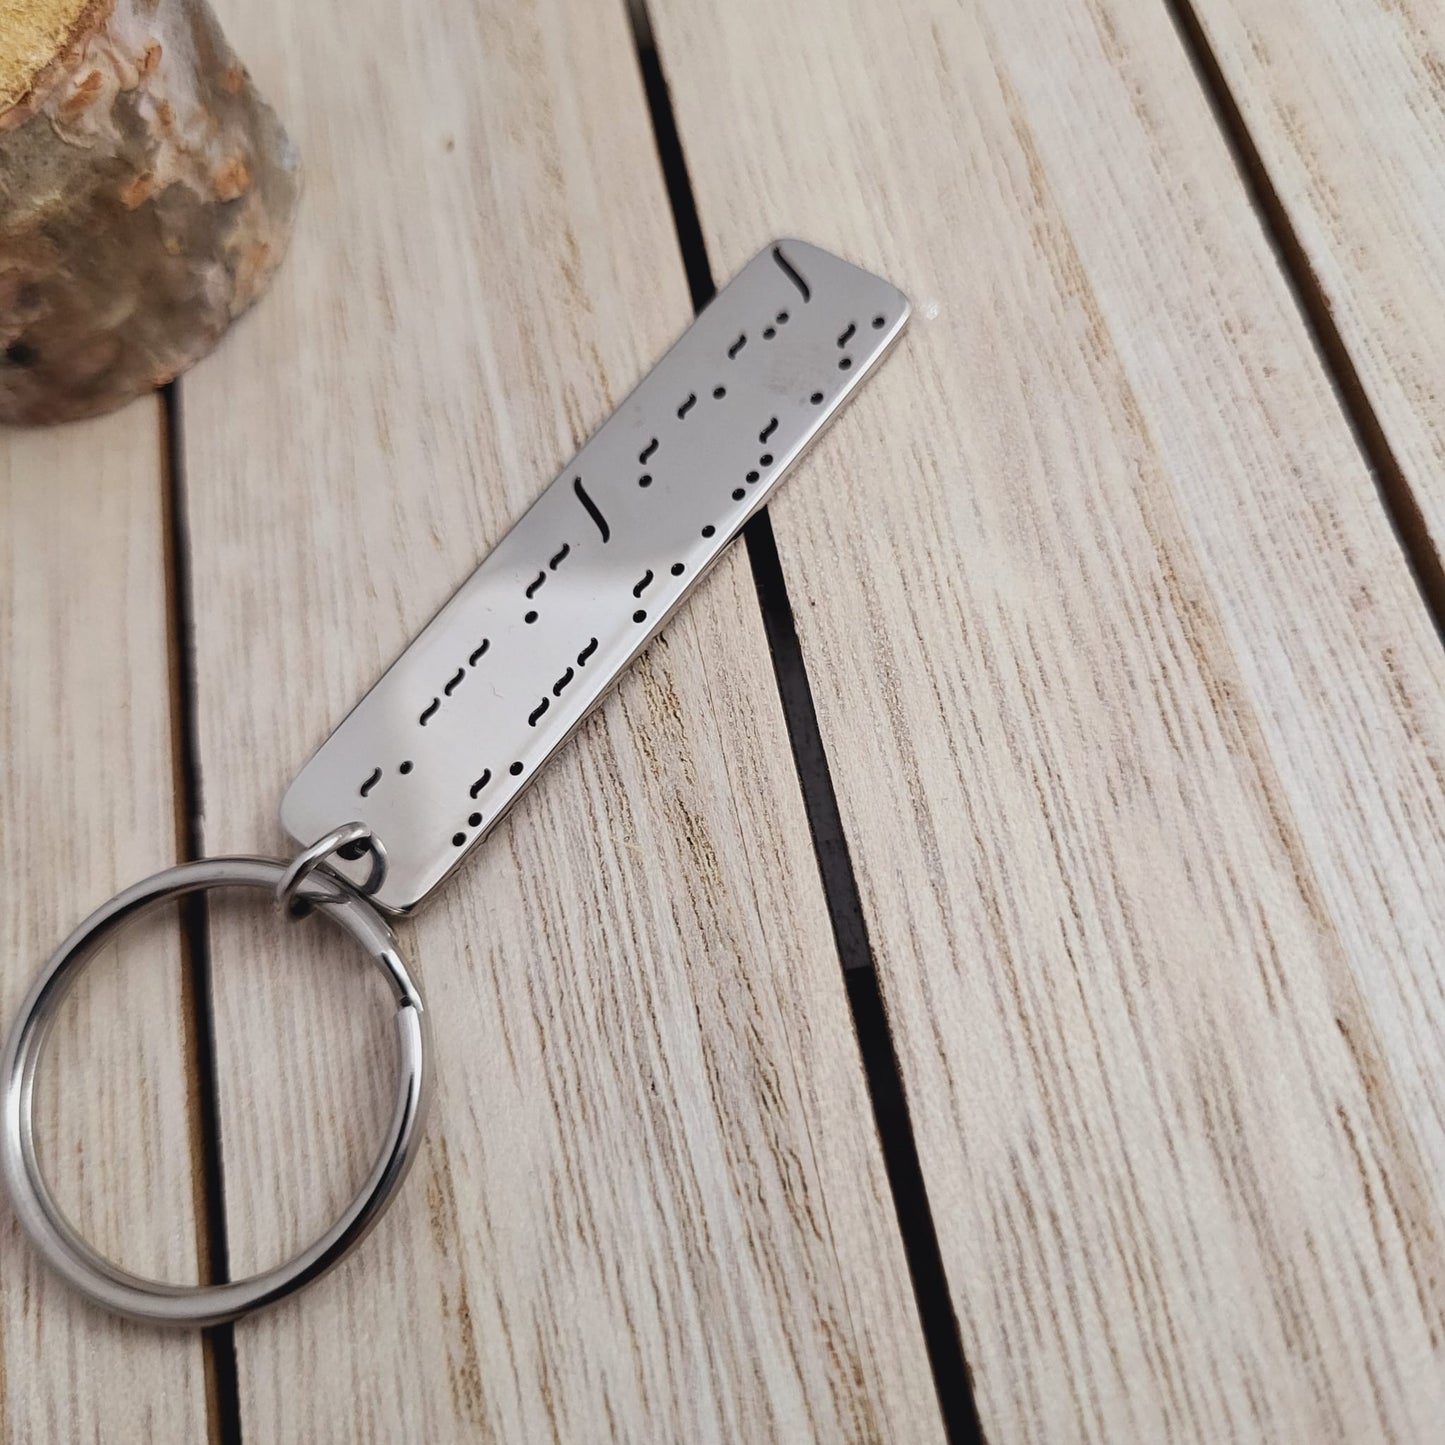 Personalized & Custom Made Morse Code Keychains. Secret Message Morse code.